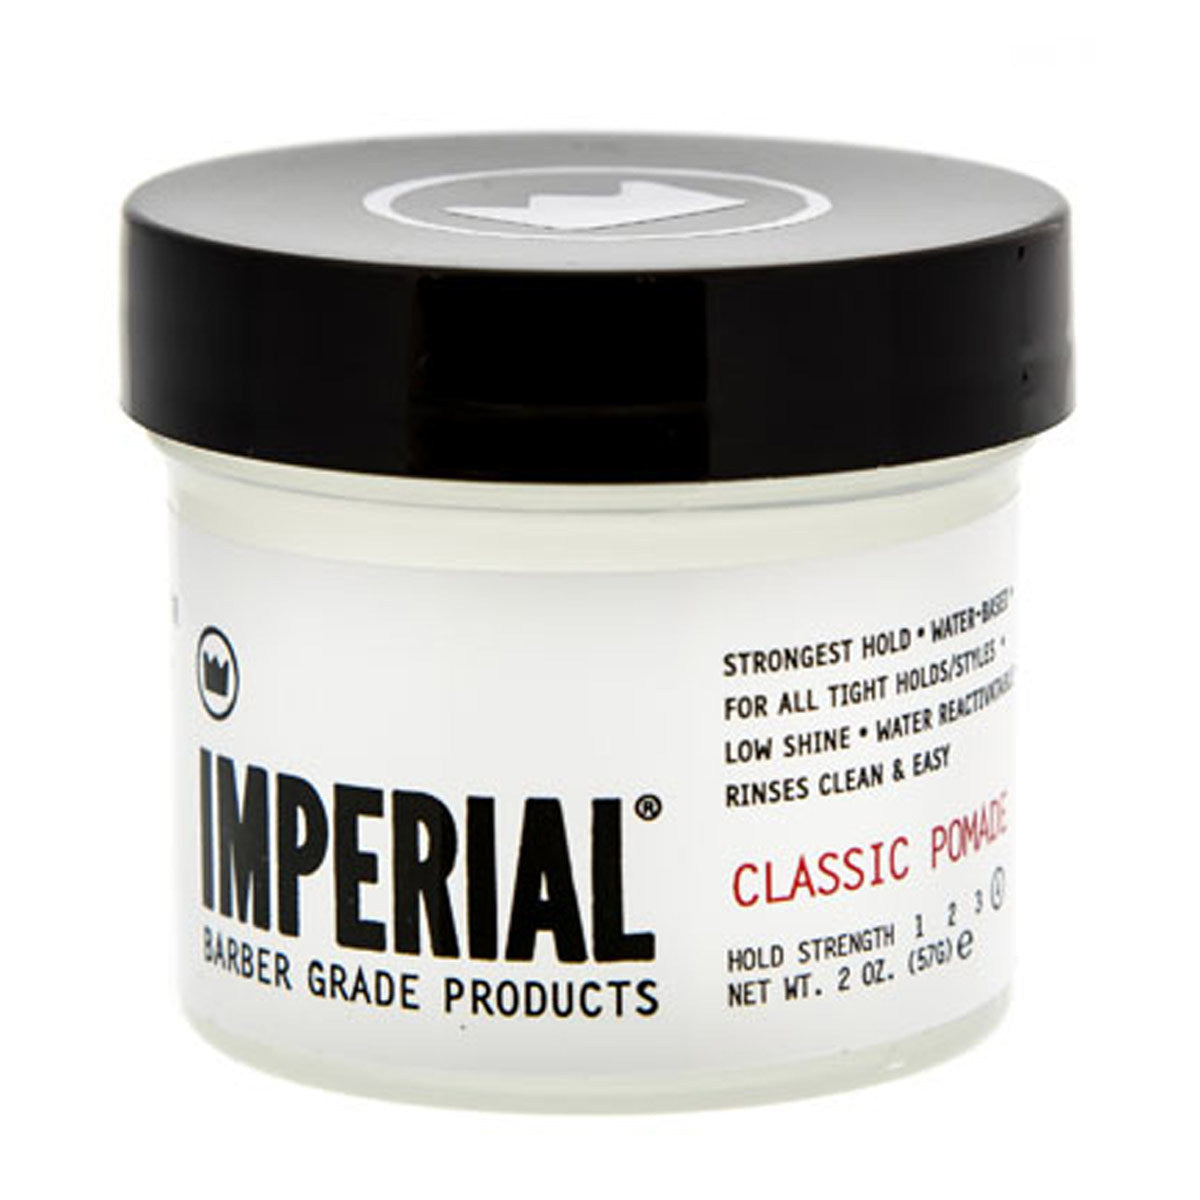 Primary image of Travel-Size Classic Pomade